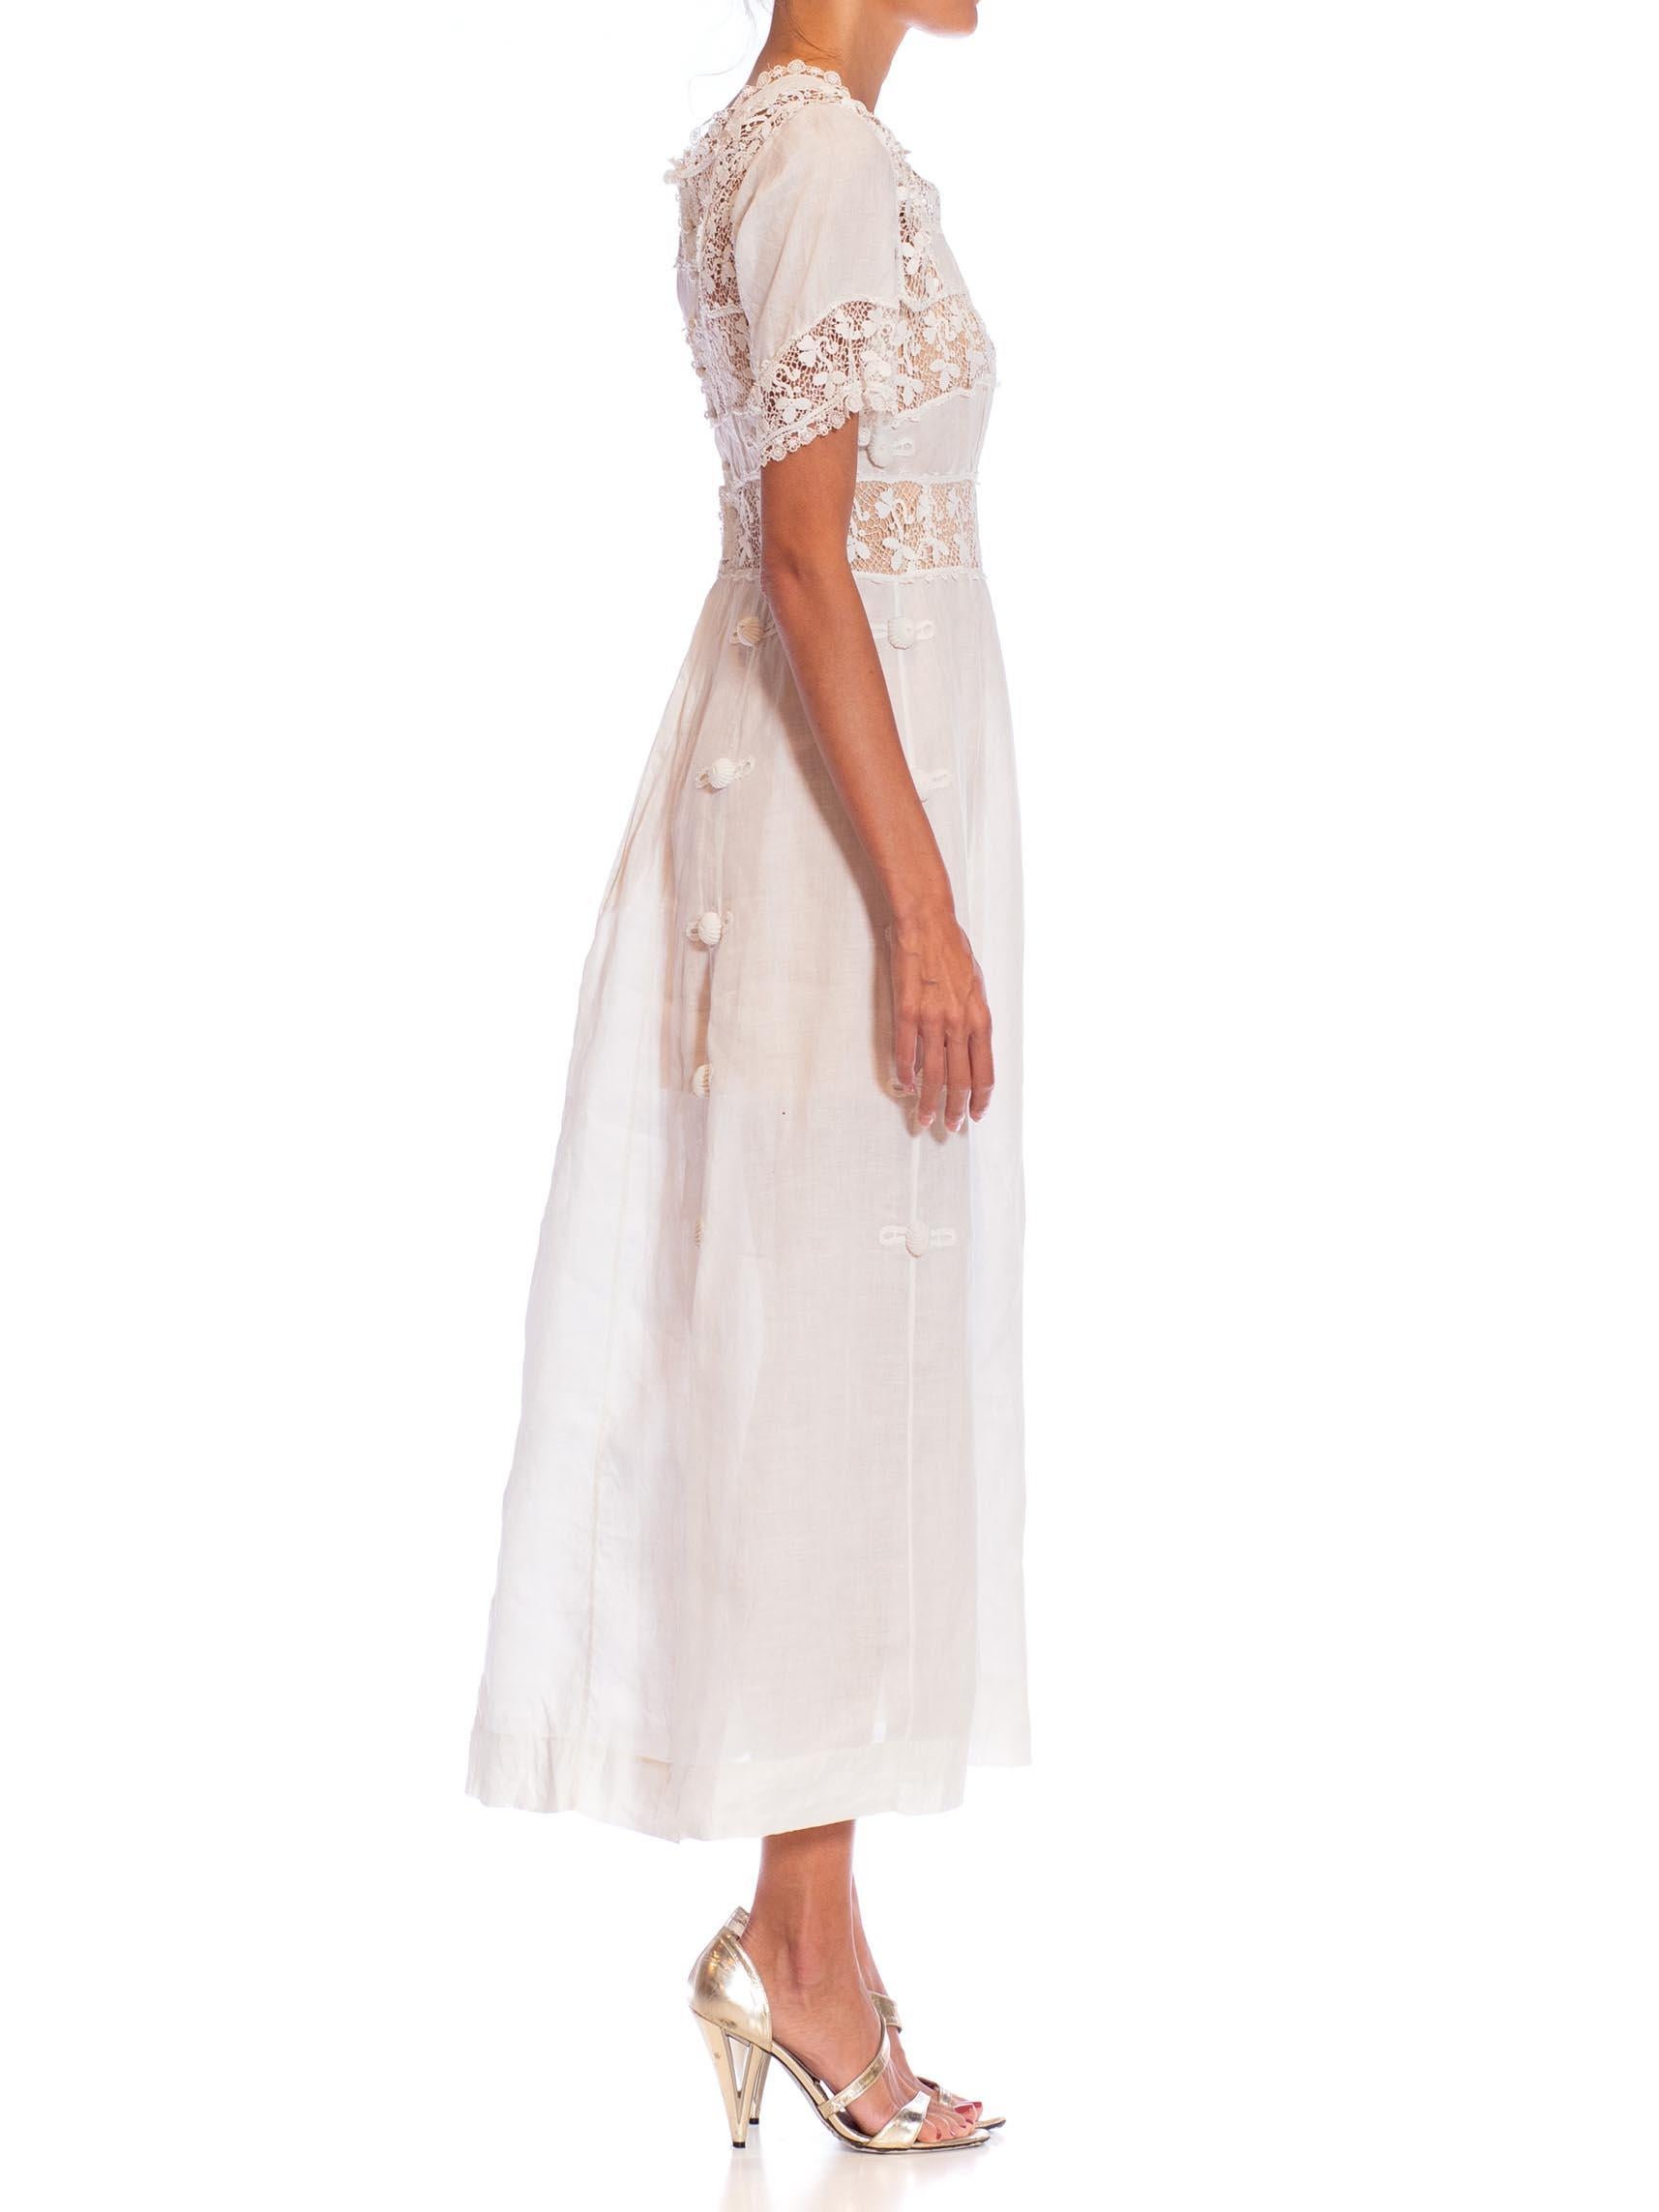 Edwardian White Linen & Lace Tea Dress With Sleeves In Excellent Condition For Sale In New York, NY